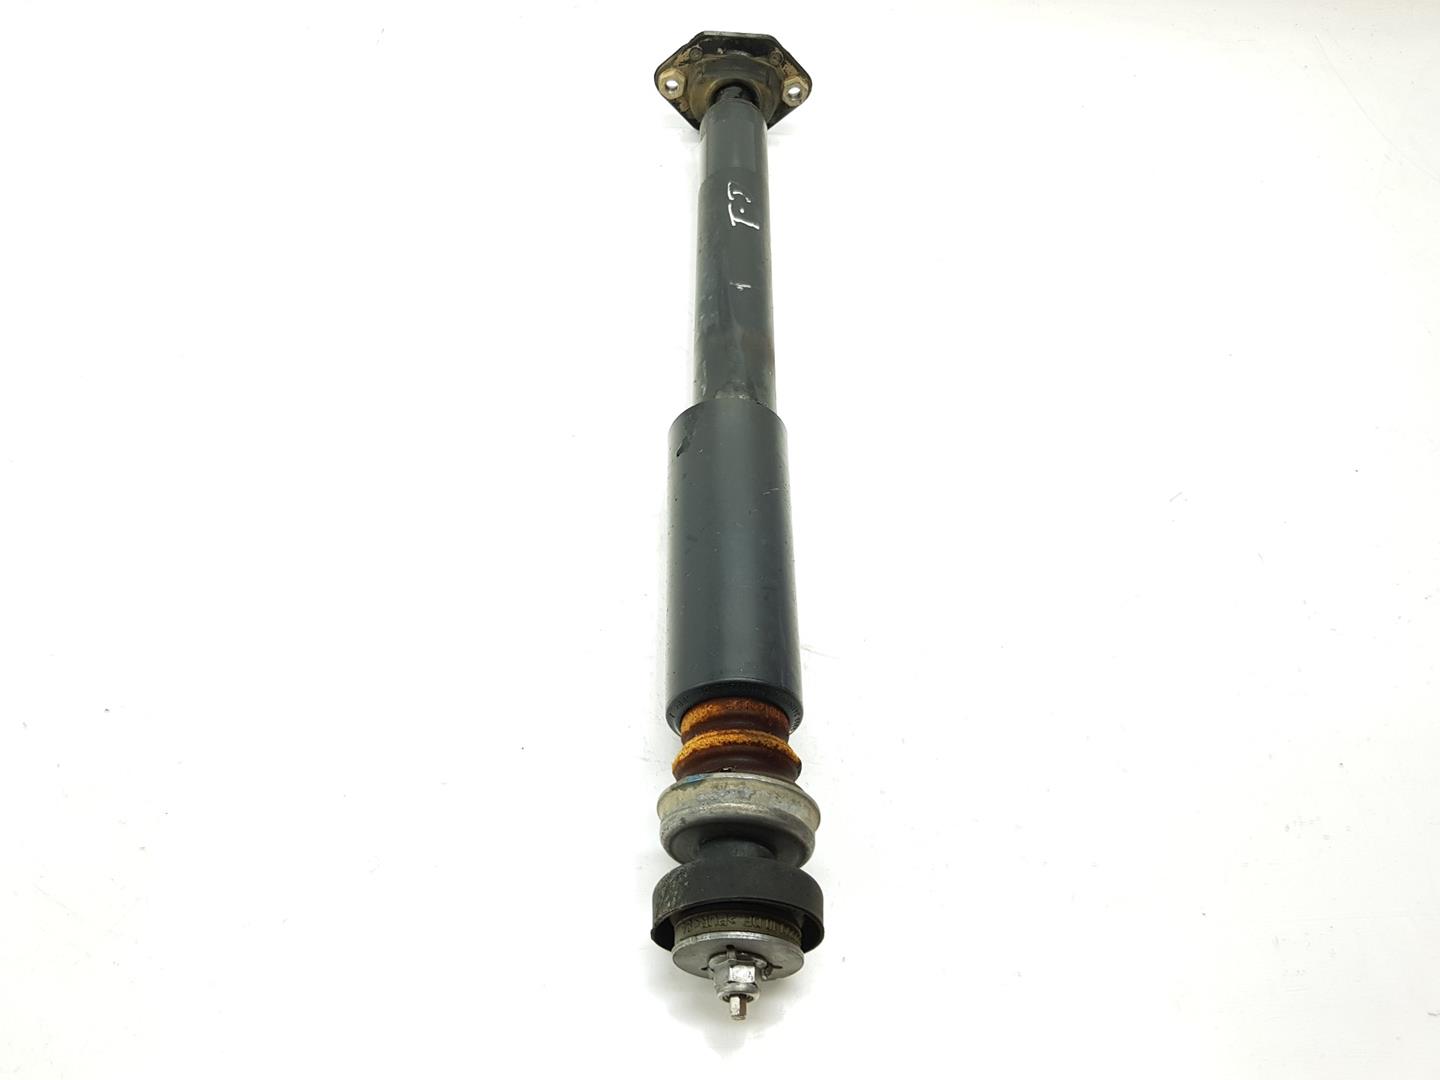 BMW X1 E84 (2009-2015) Rear Right Shock Absorber 6855243, 33526855243 24248886